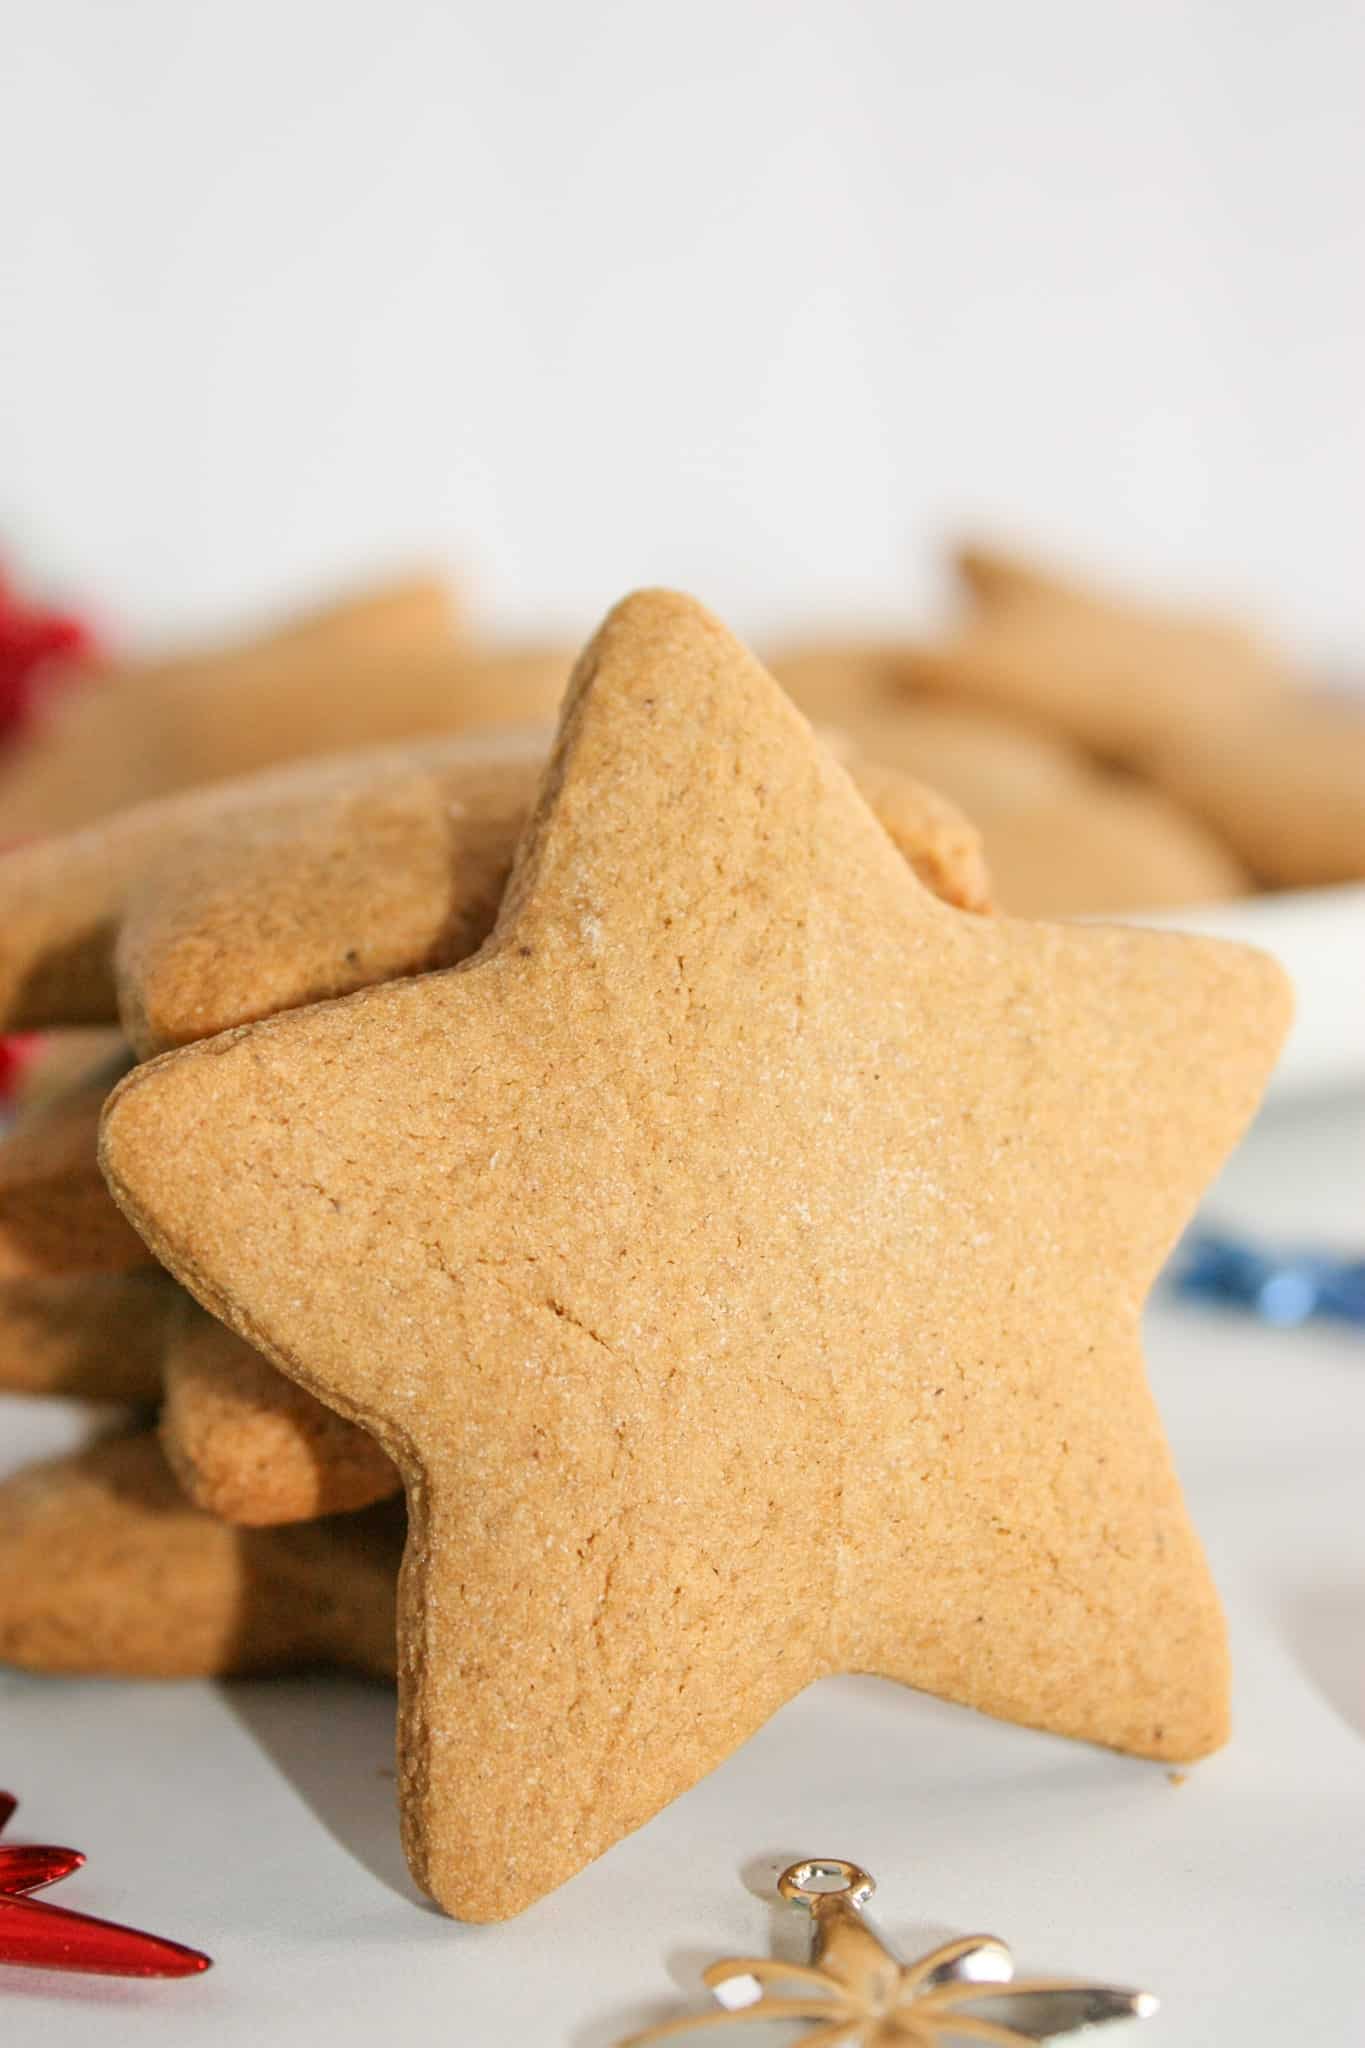 'Tis the season for gingerbread and this Gluten Free Gingerbread recipe does not disappoint.  